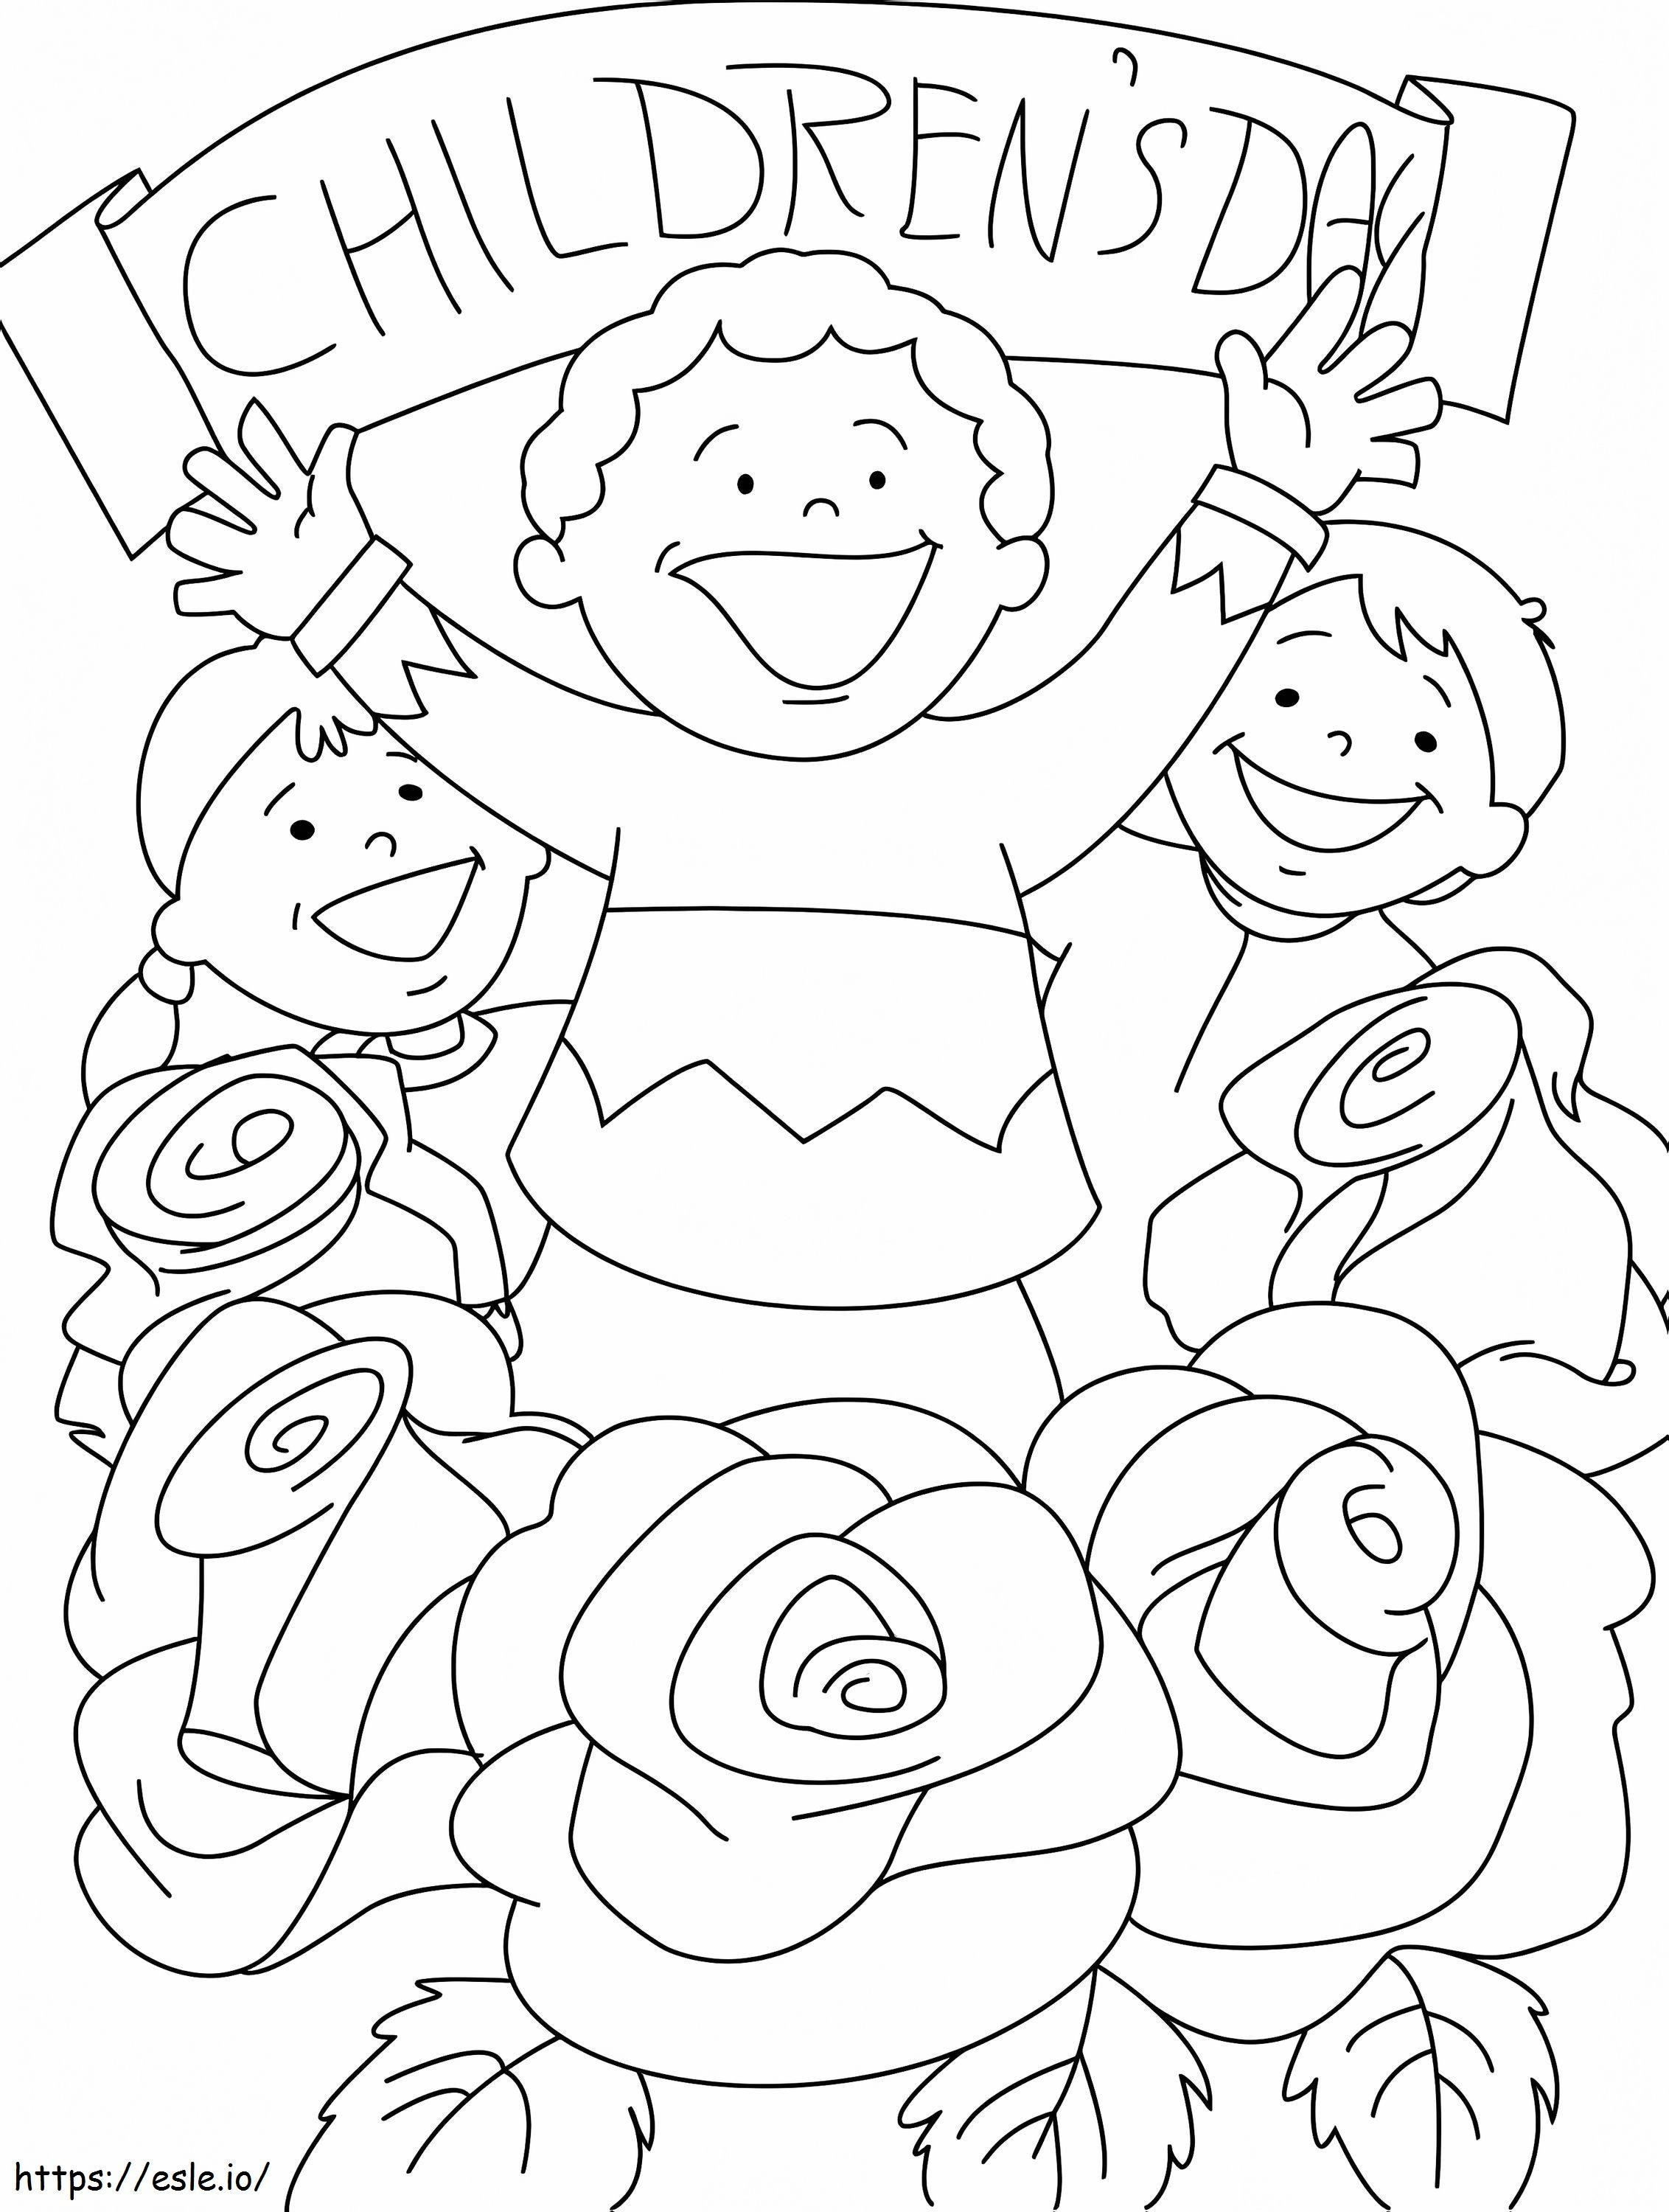 Childrens Day 6 coloring page